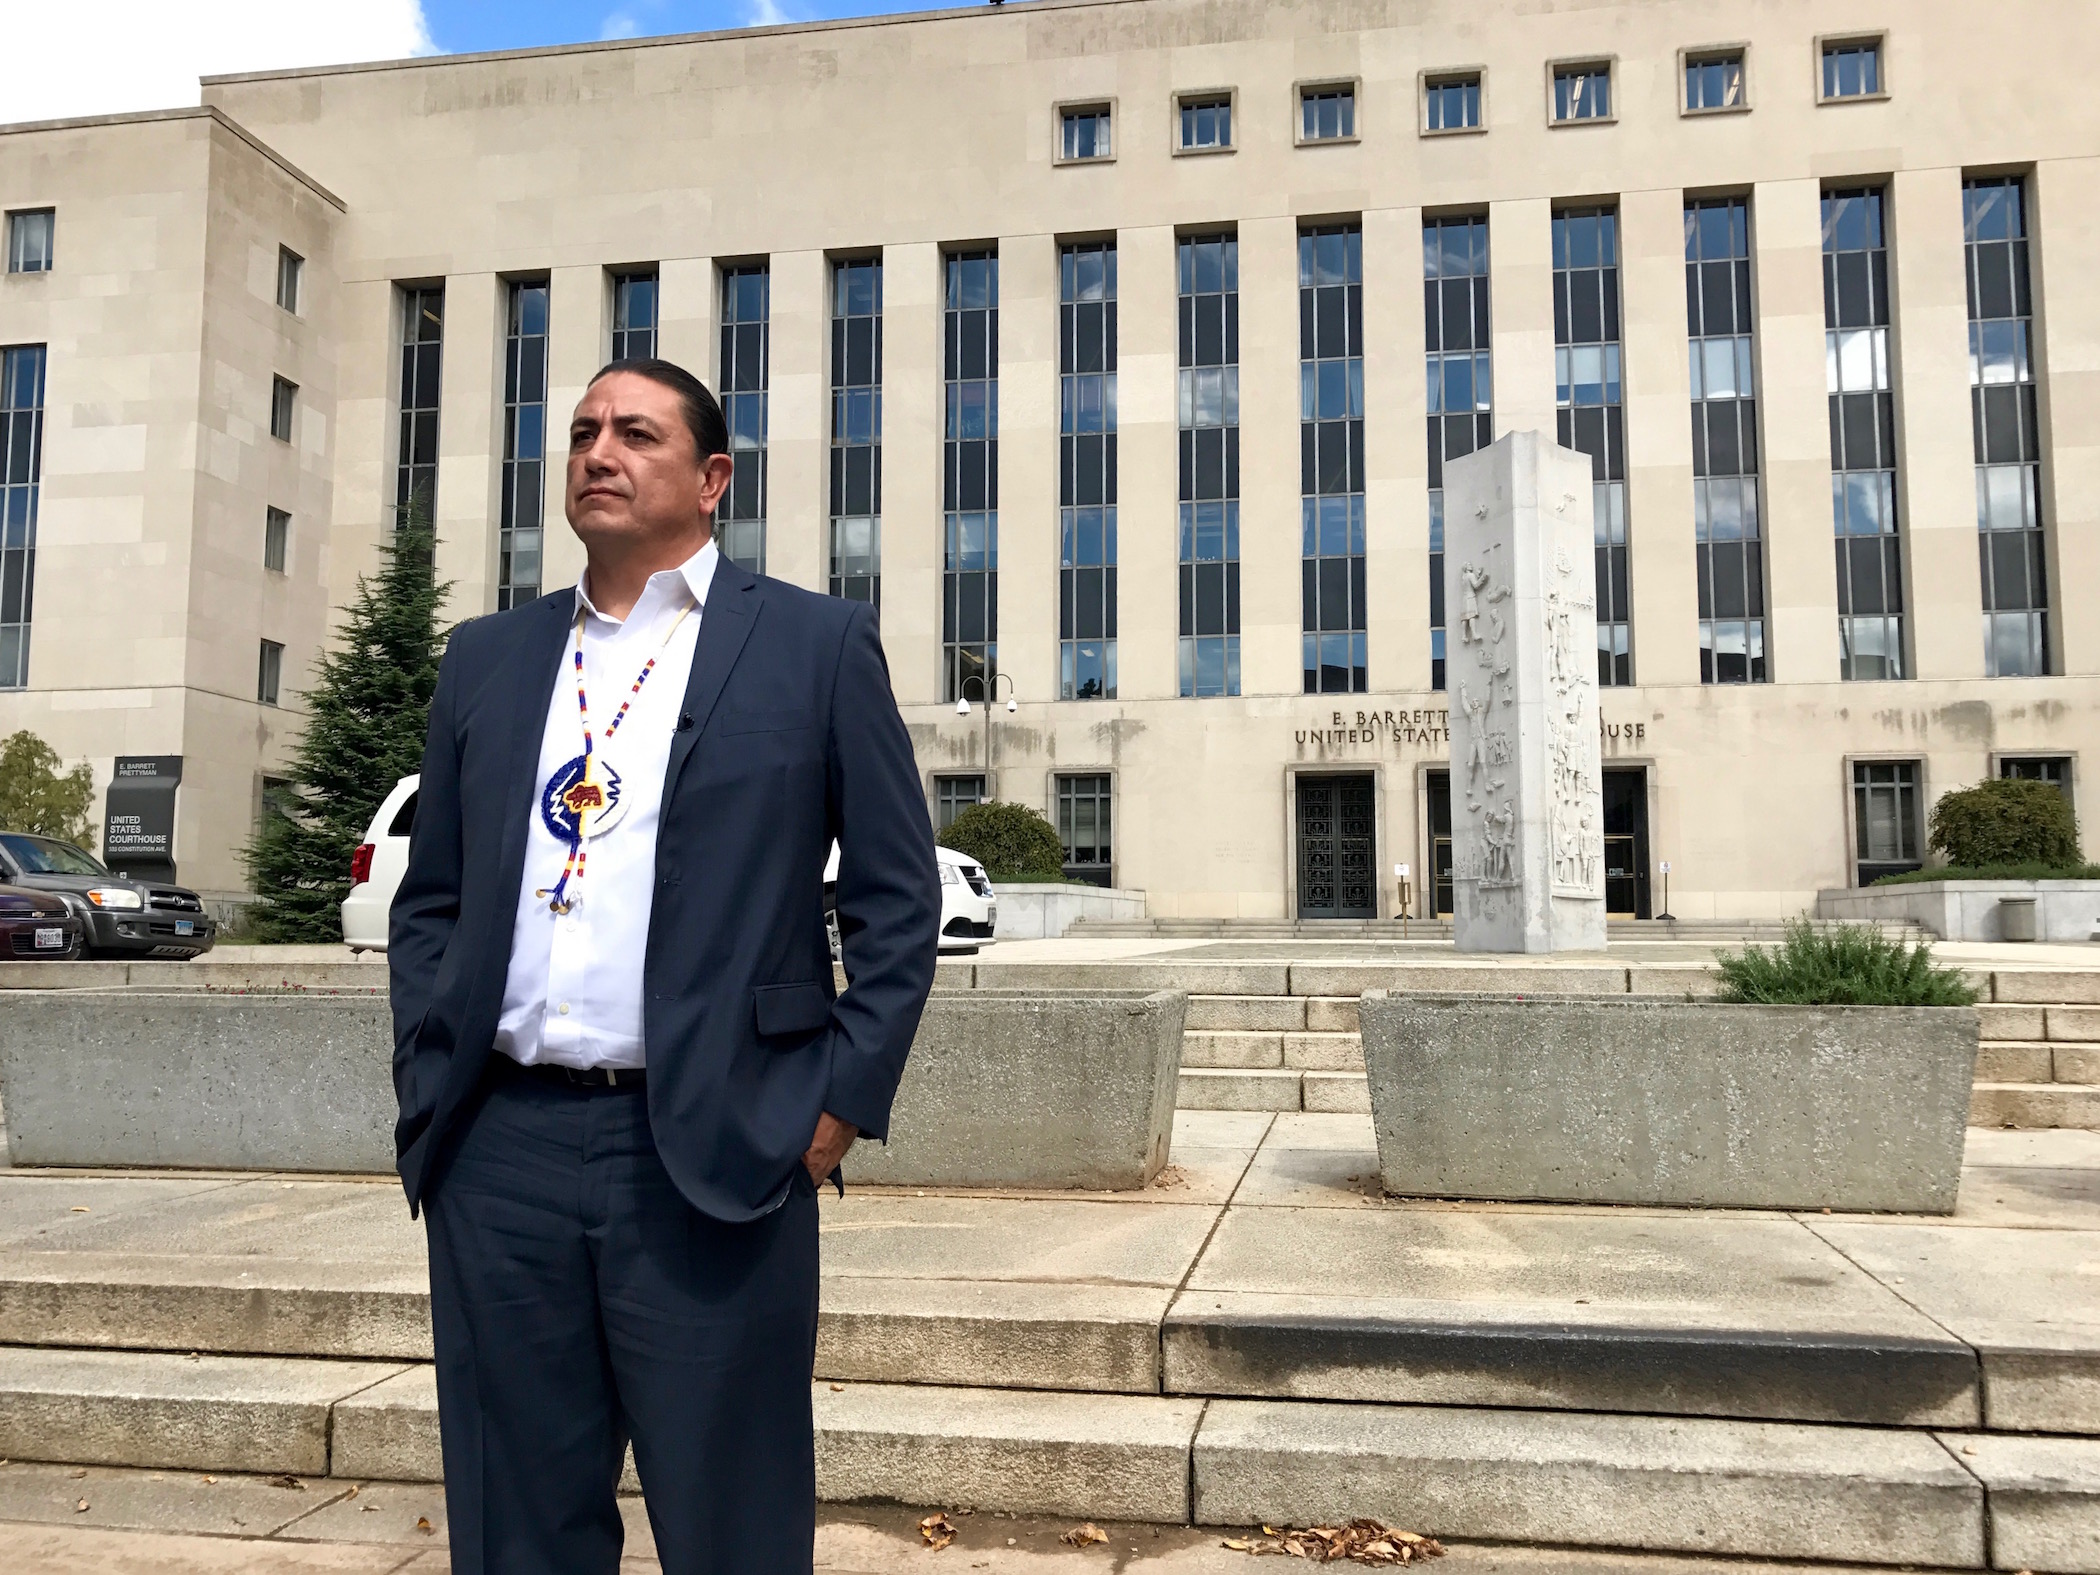 Appeals court takes up #NoDAPL case as pipeline remains in limbo